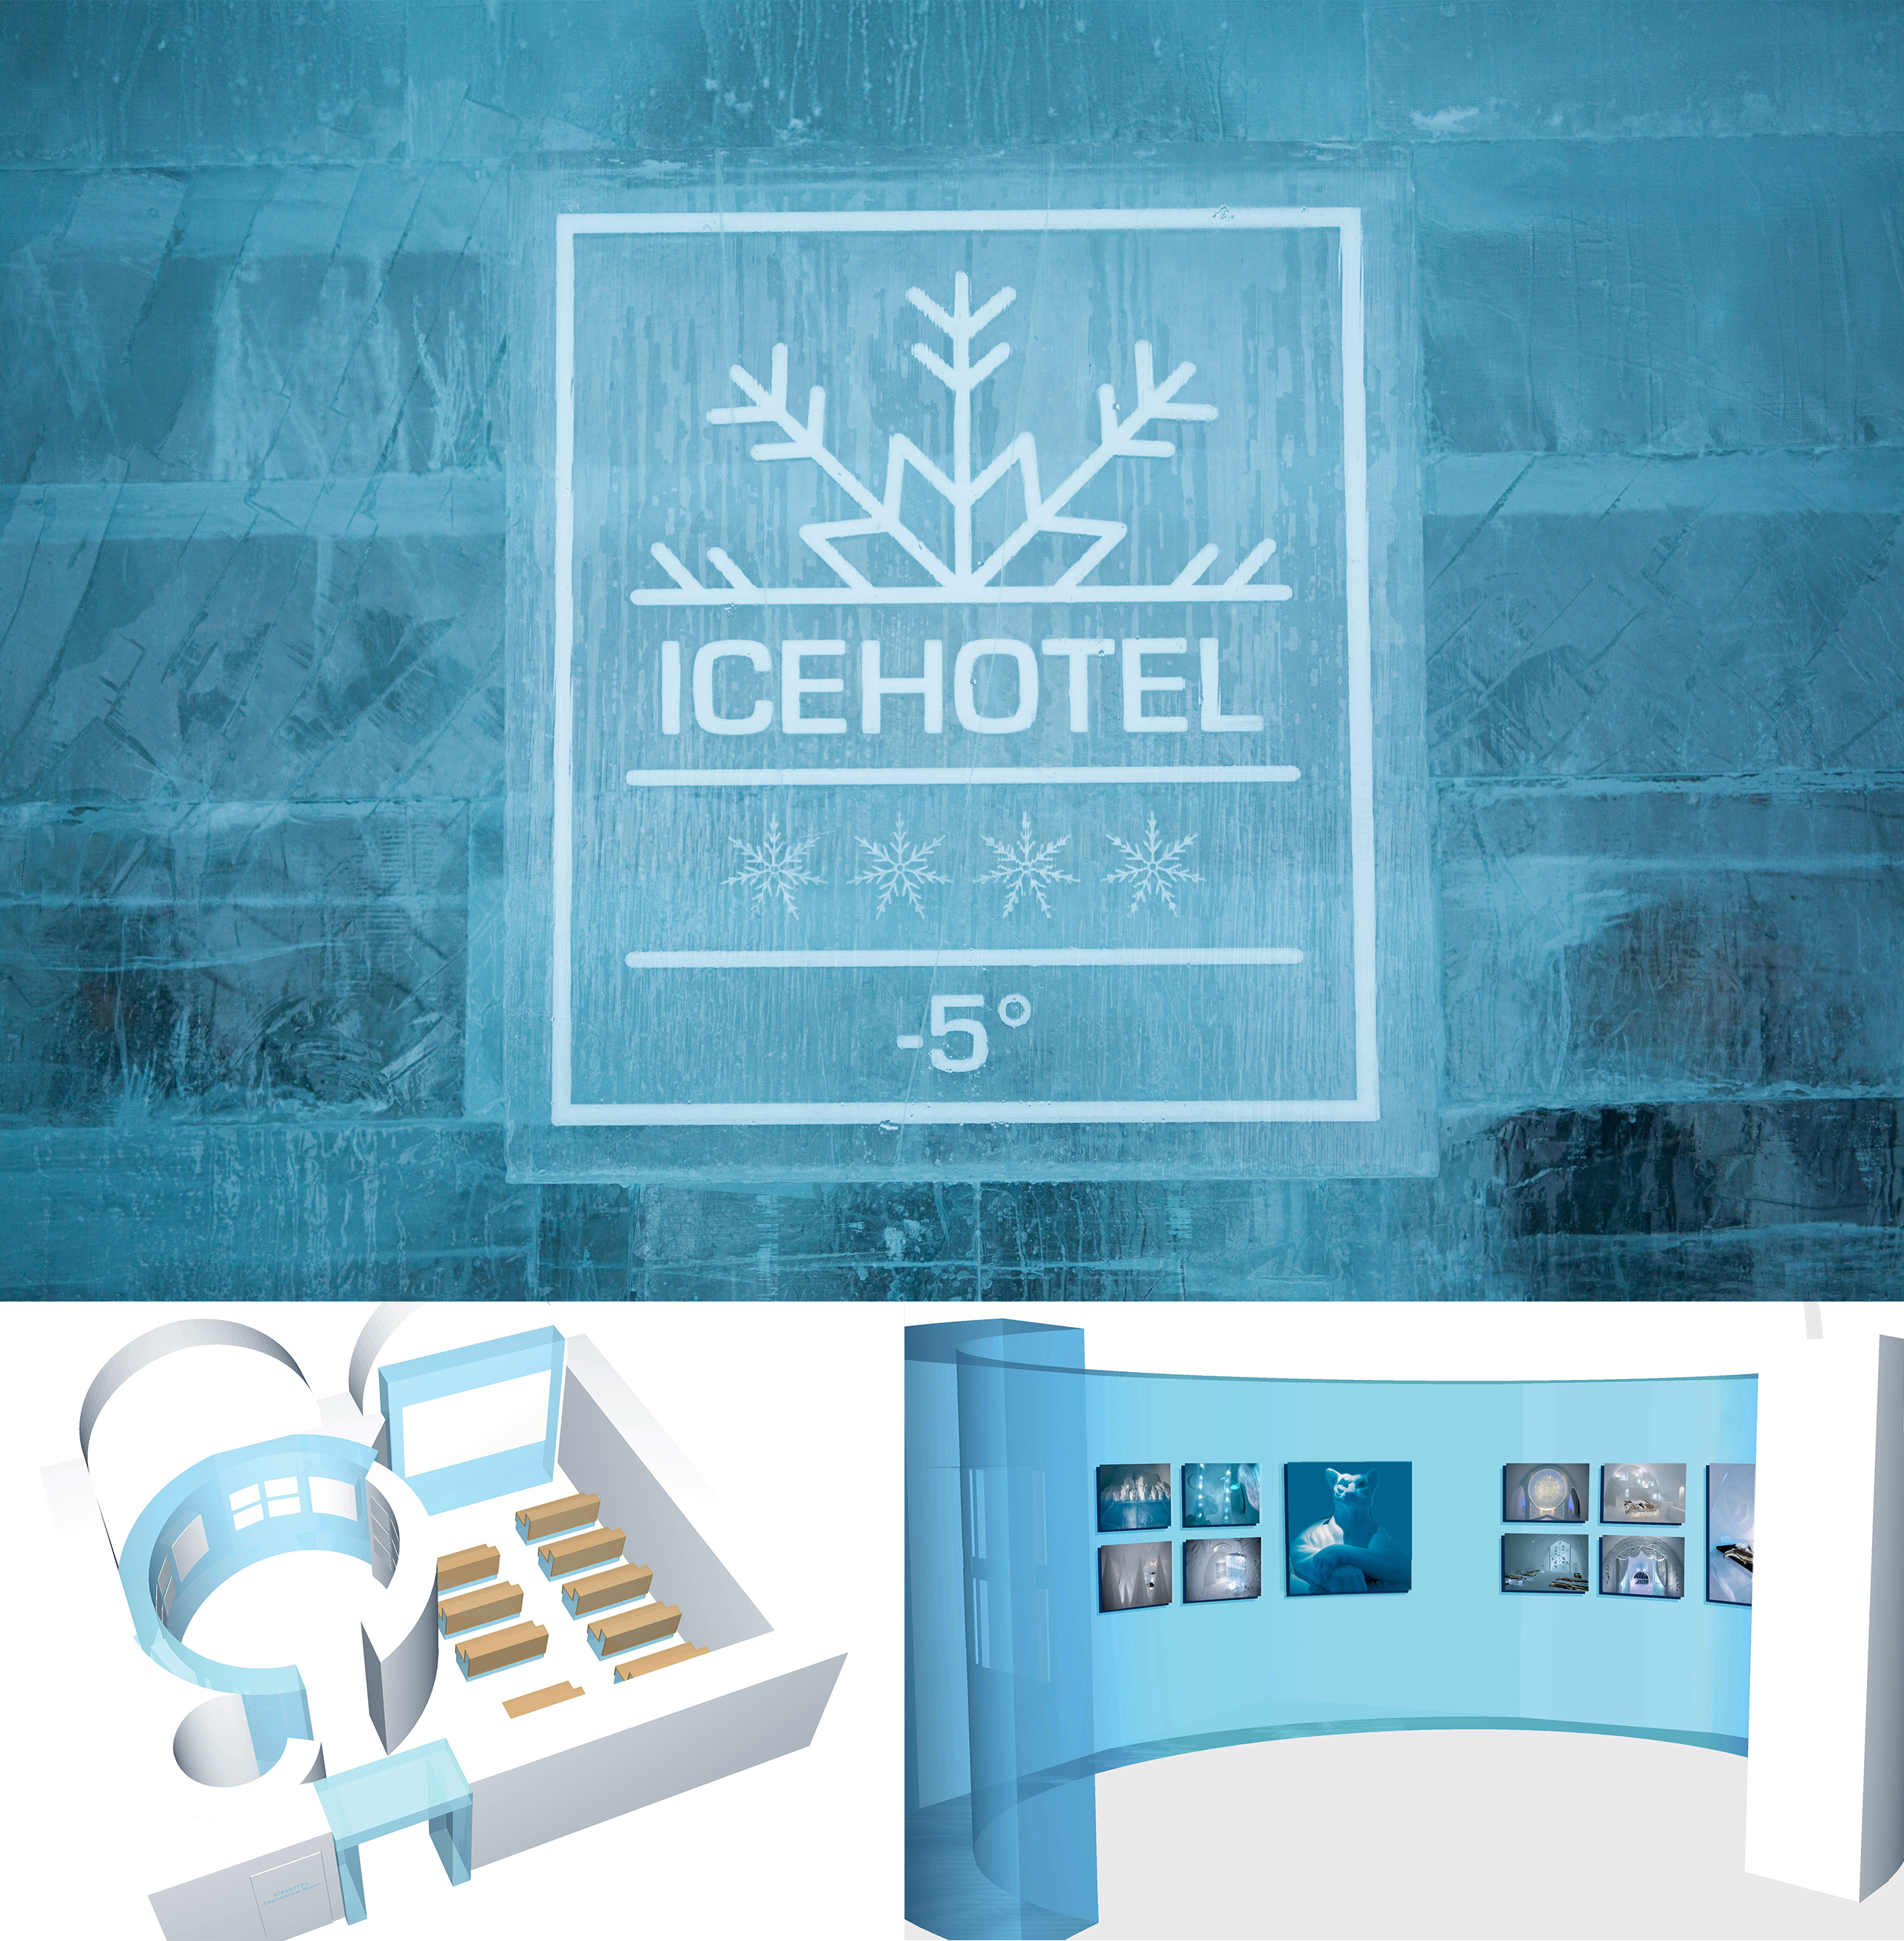 Illustrations of new experience room at Icehotel